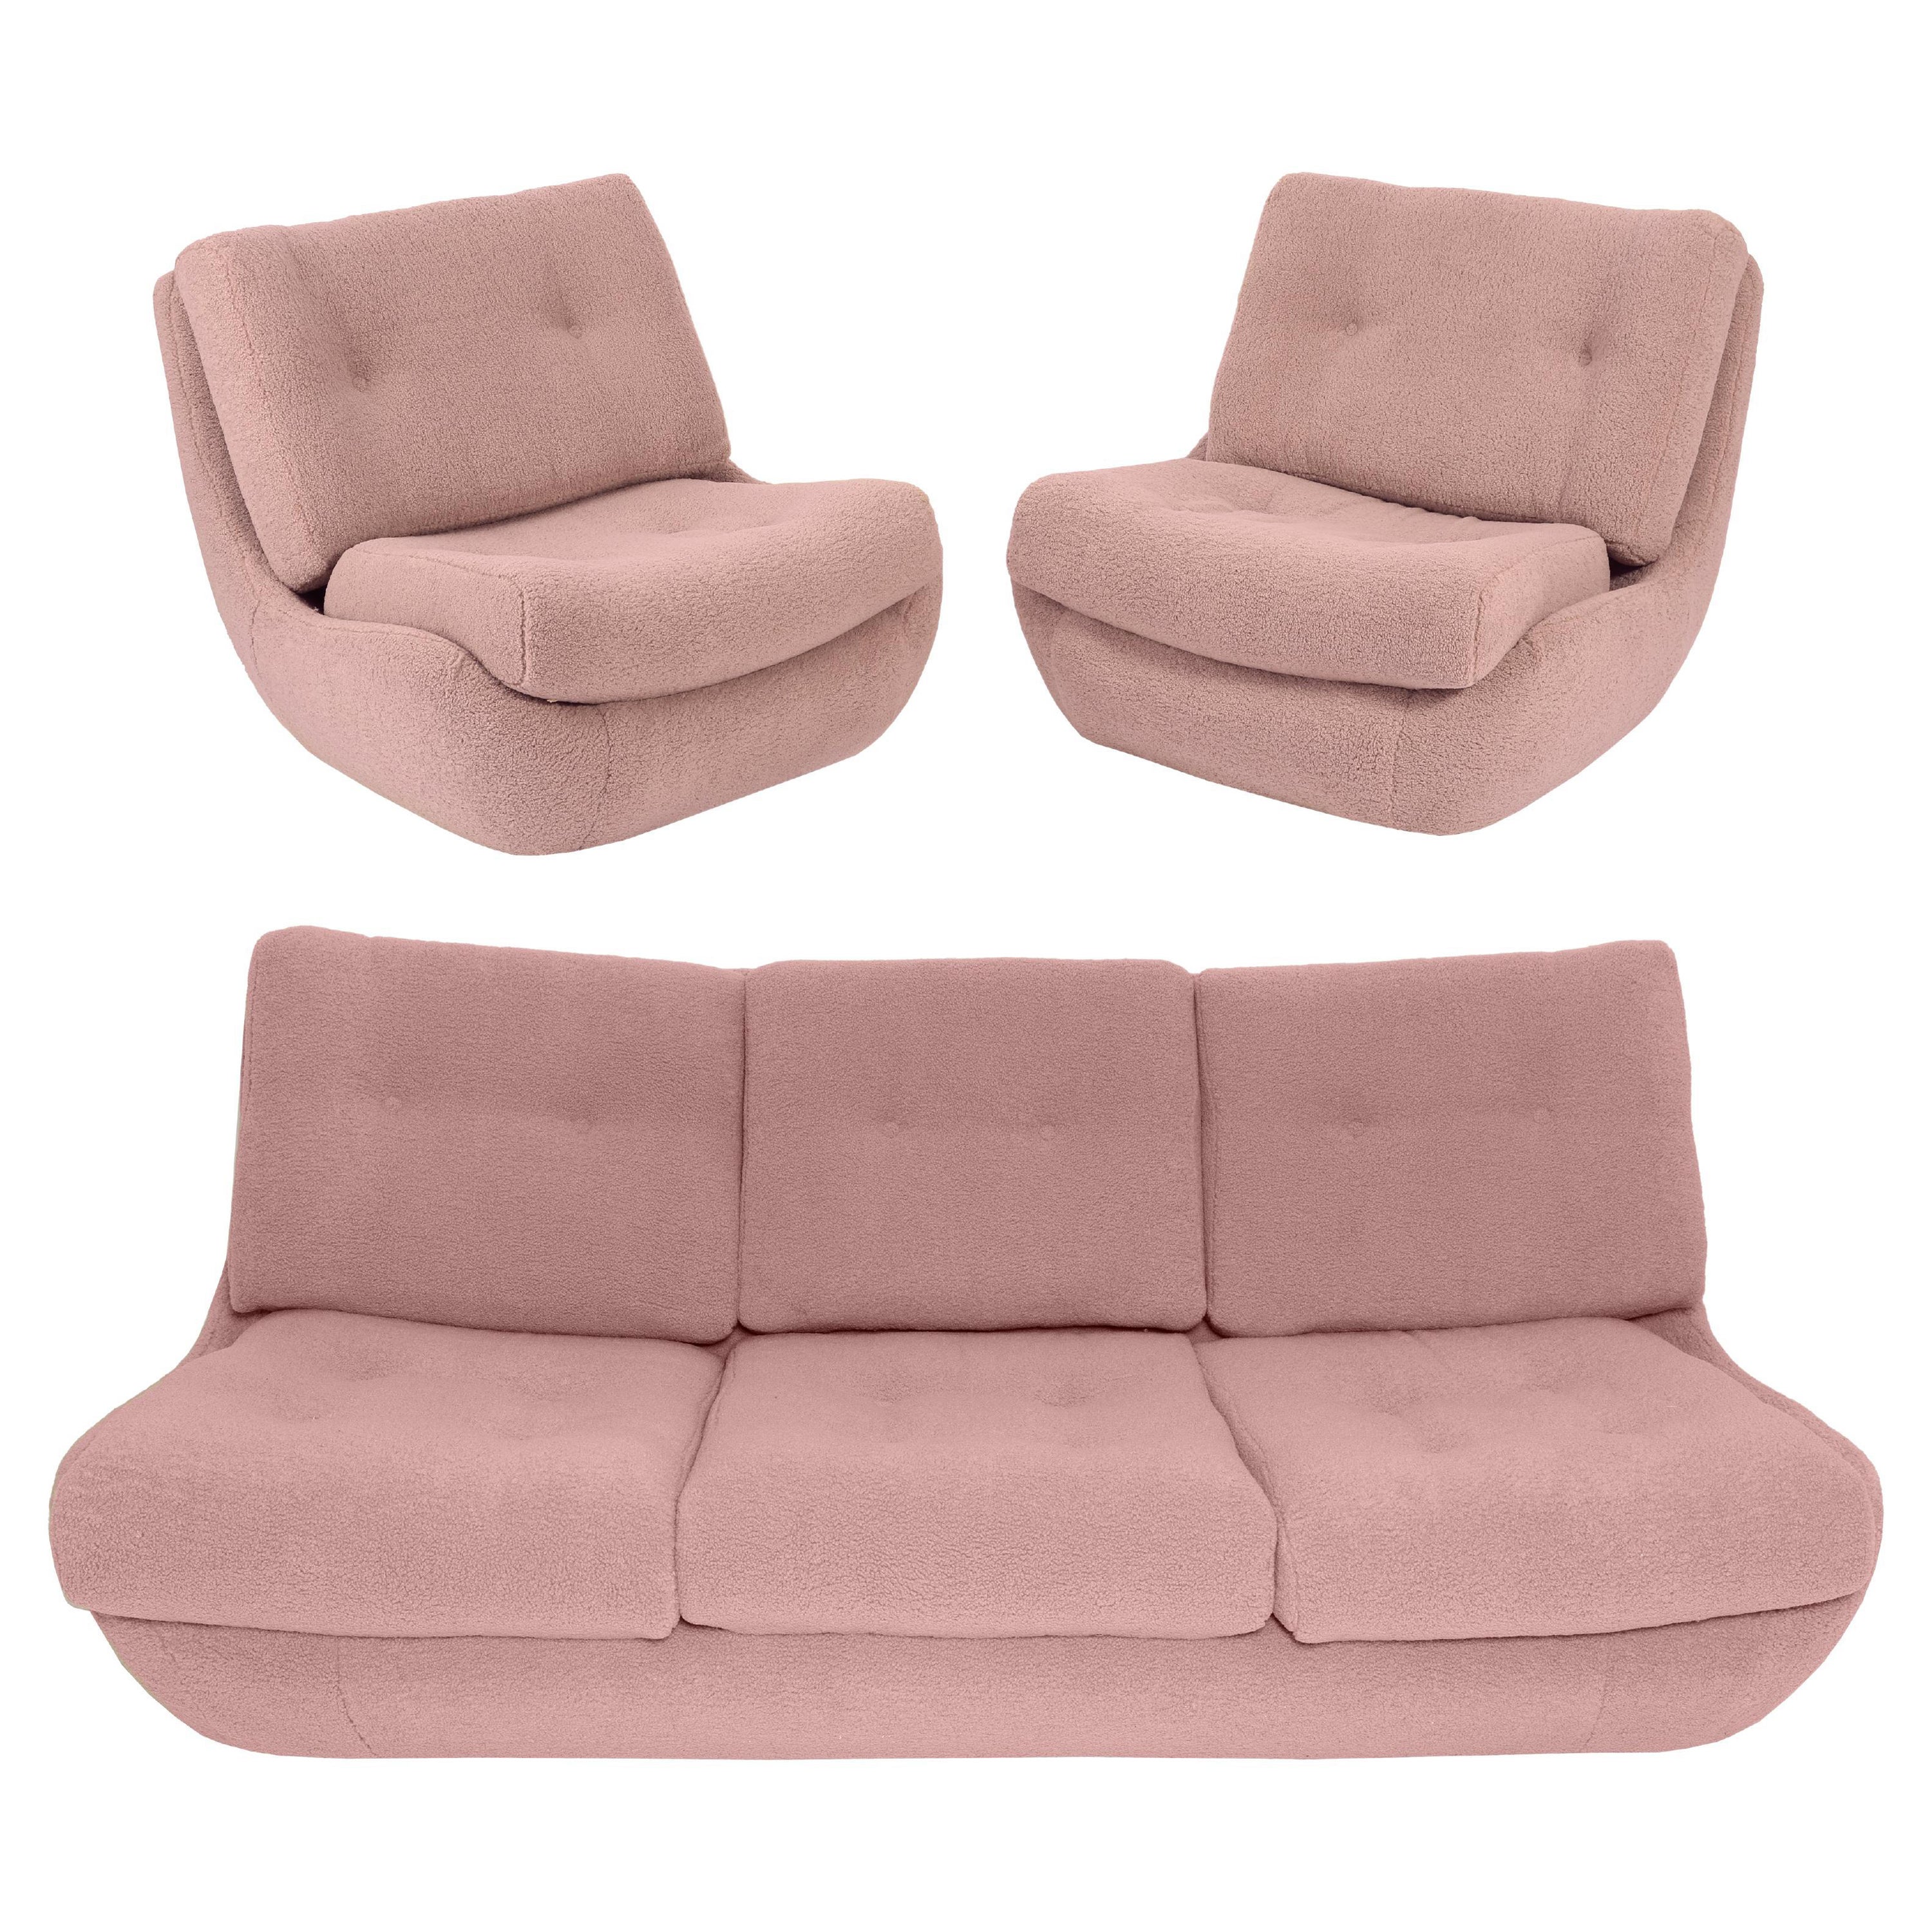 Pink Blush Boucle Atlantis Sofa and Armchairs, Europe, 1960s For Sale